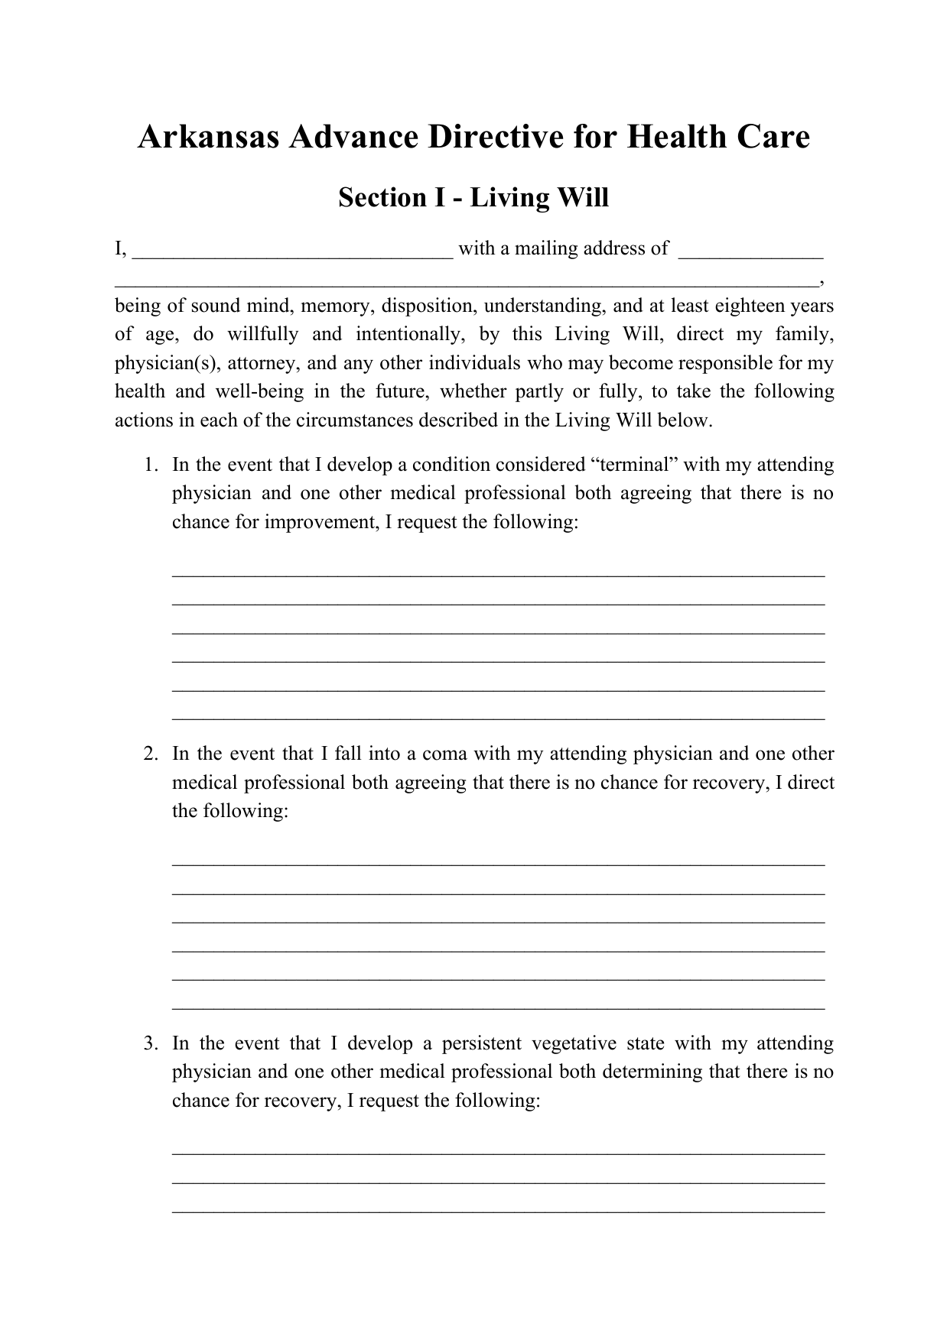 Advance Directive for Health Care Form - Arkansas, Page 1